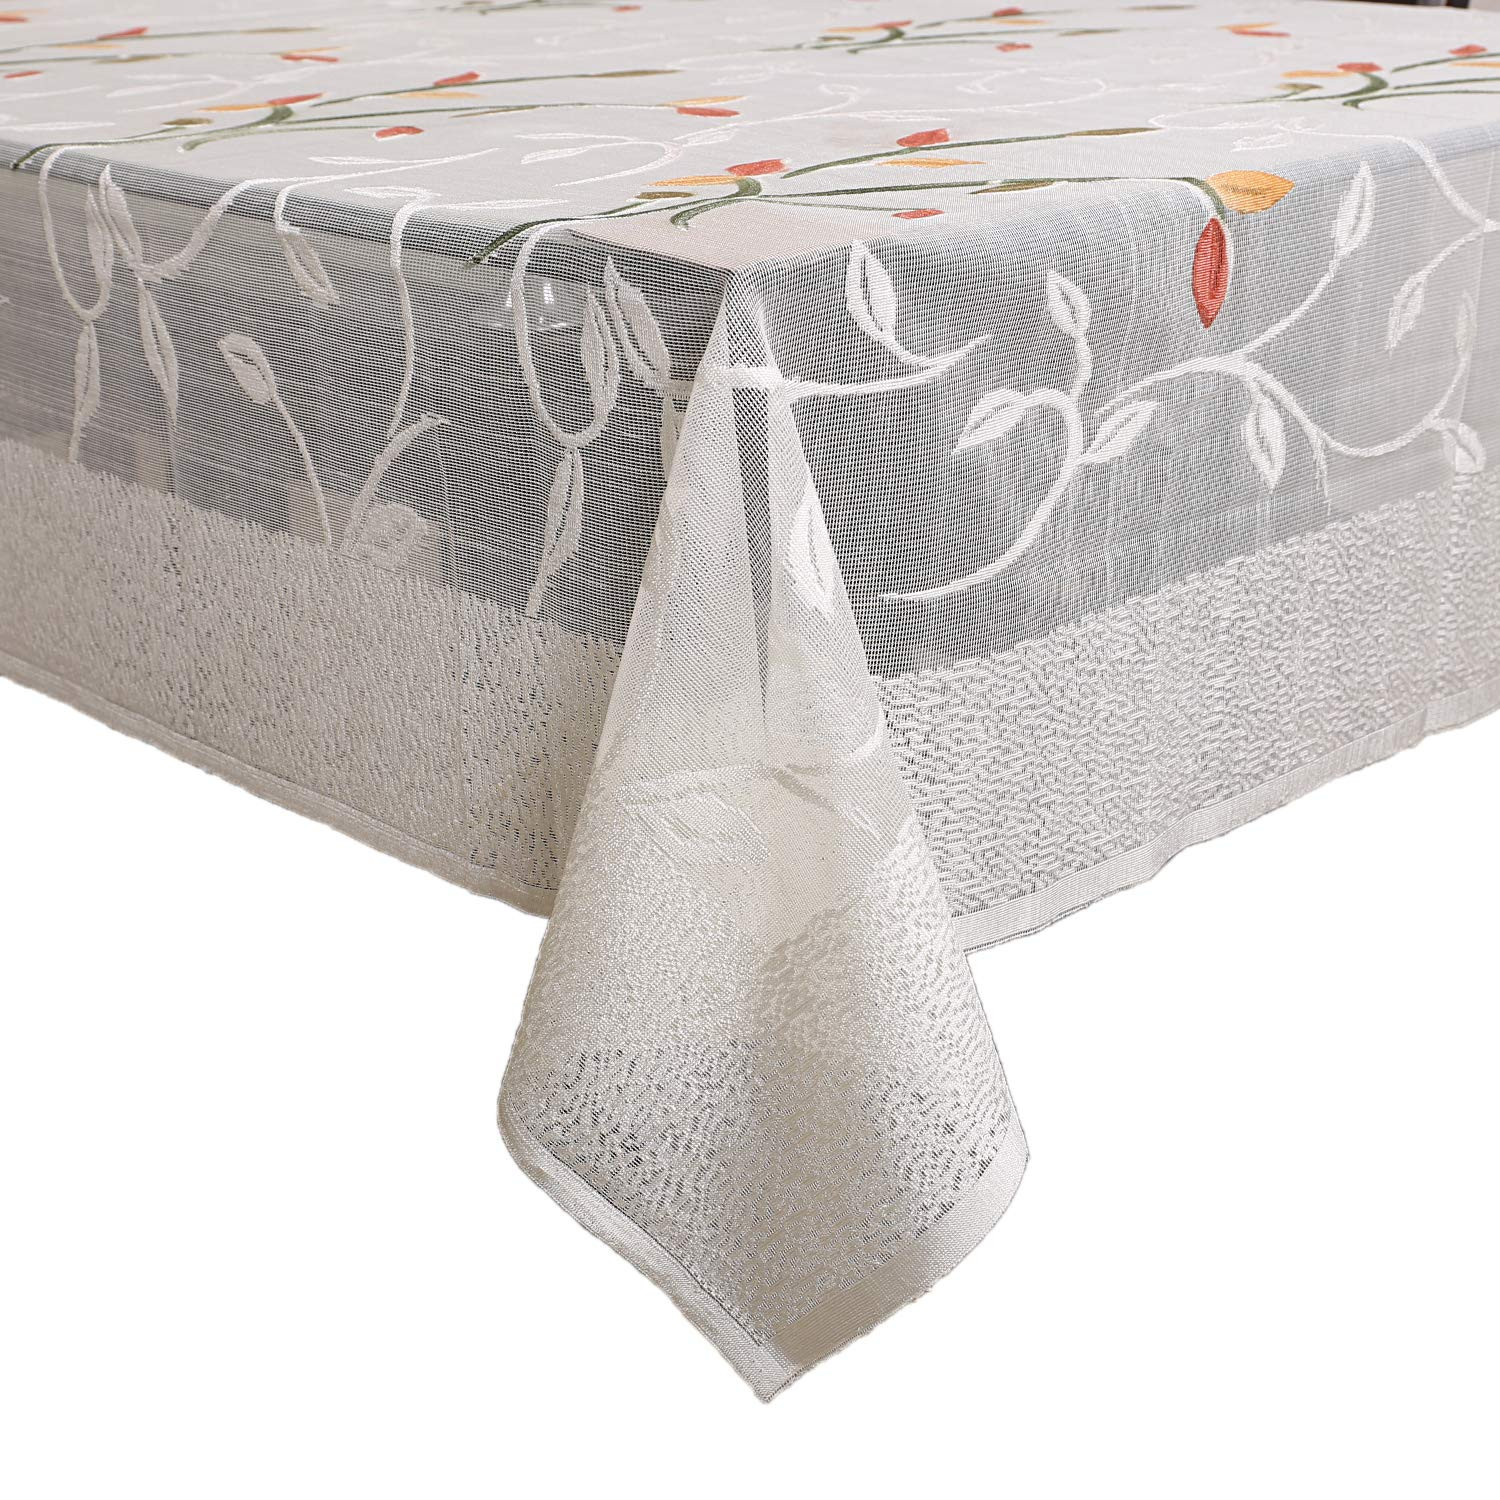 Kuber Industries Leaf Print Cotton 4 Seater Dining Table Cover,Cream-KUBMRT11909